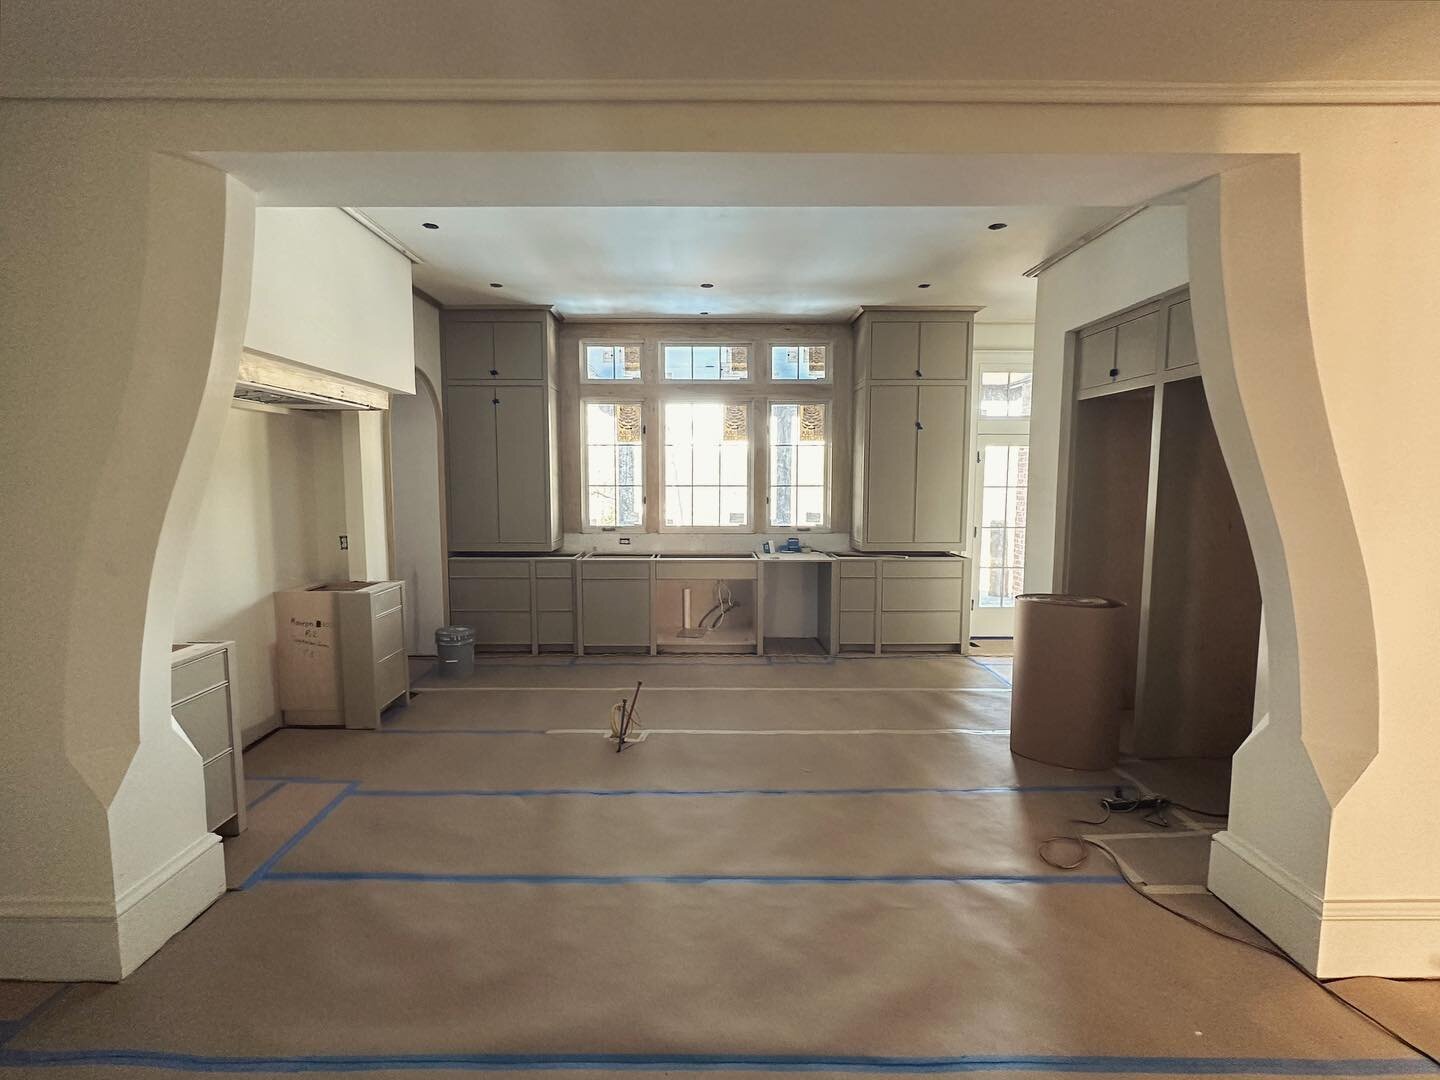 Checking in on our Overhill Rd #renovation project&hellip;

Kitchens are one of our favorite spaces to design, and this one has arrived at the really fun part. All the final pieces are coming together and should look like the real thing in just a cou